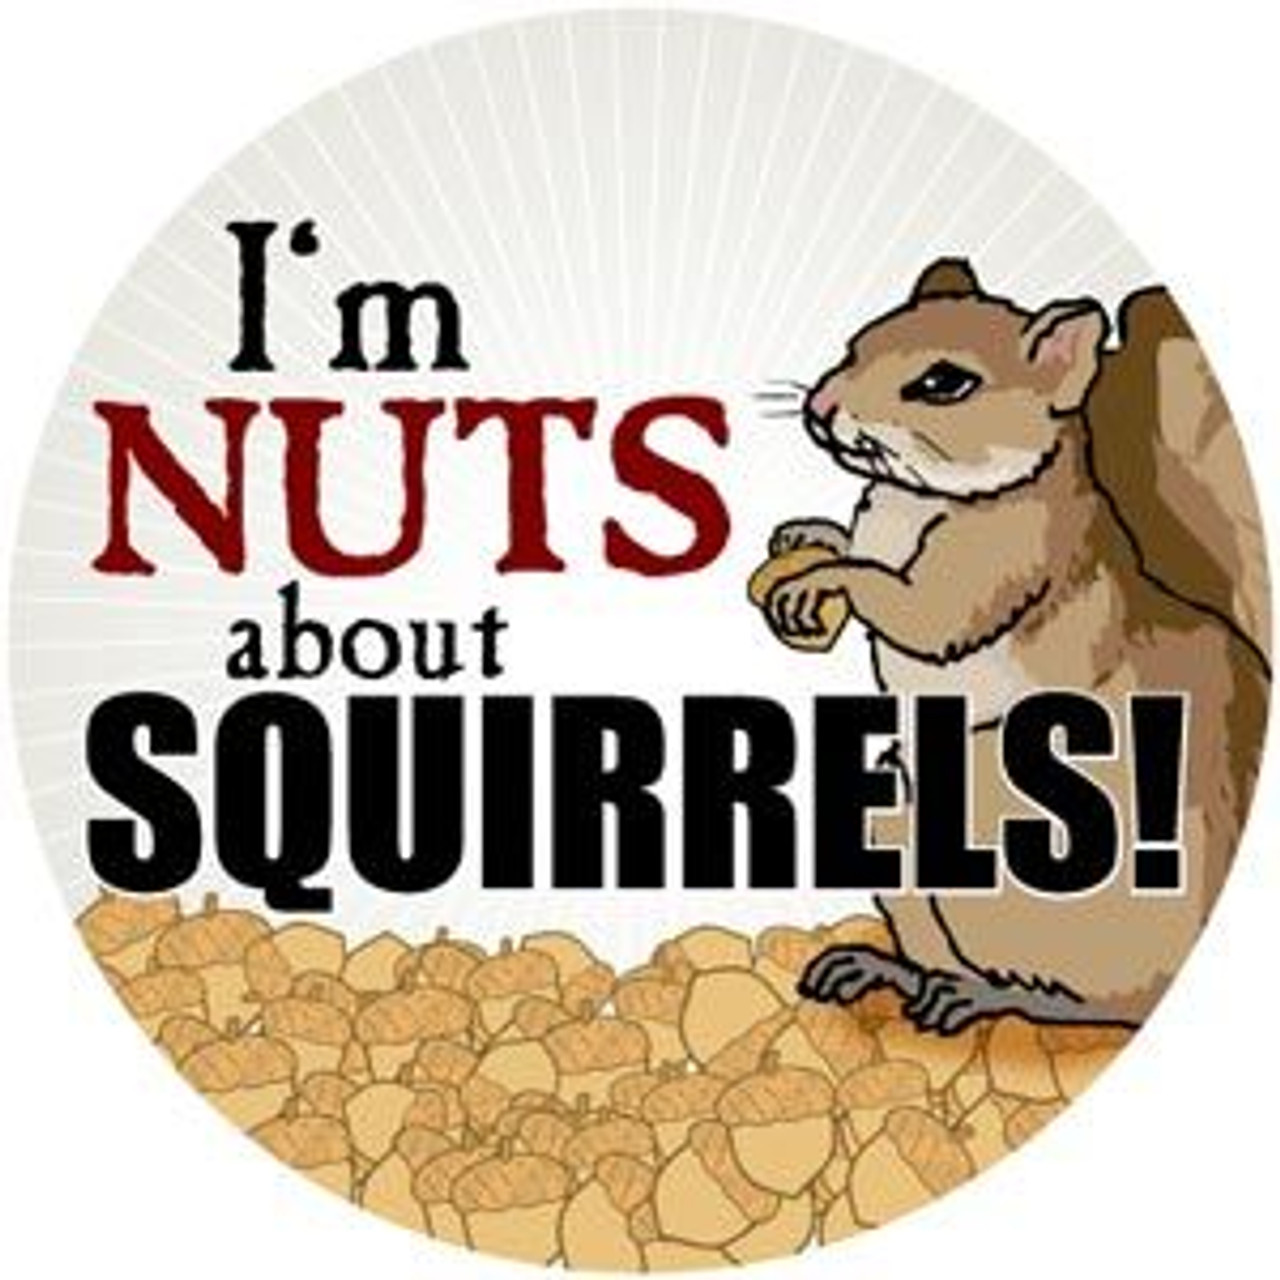 I'm Nuts about Squirrels! Magnet